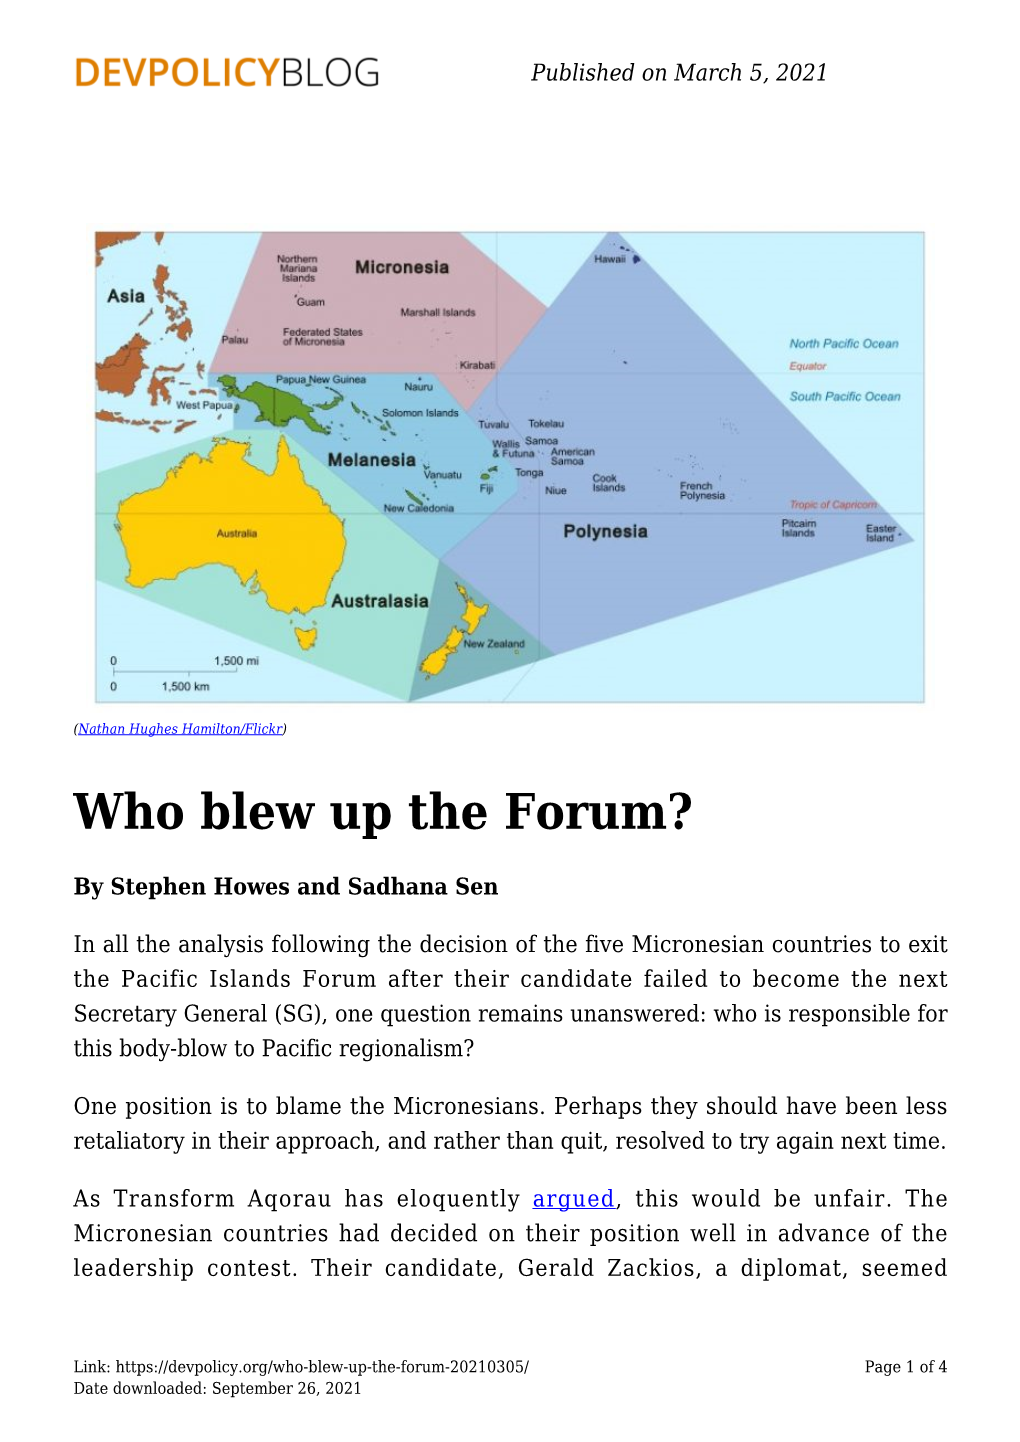 Who Blew up the Forum?